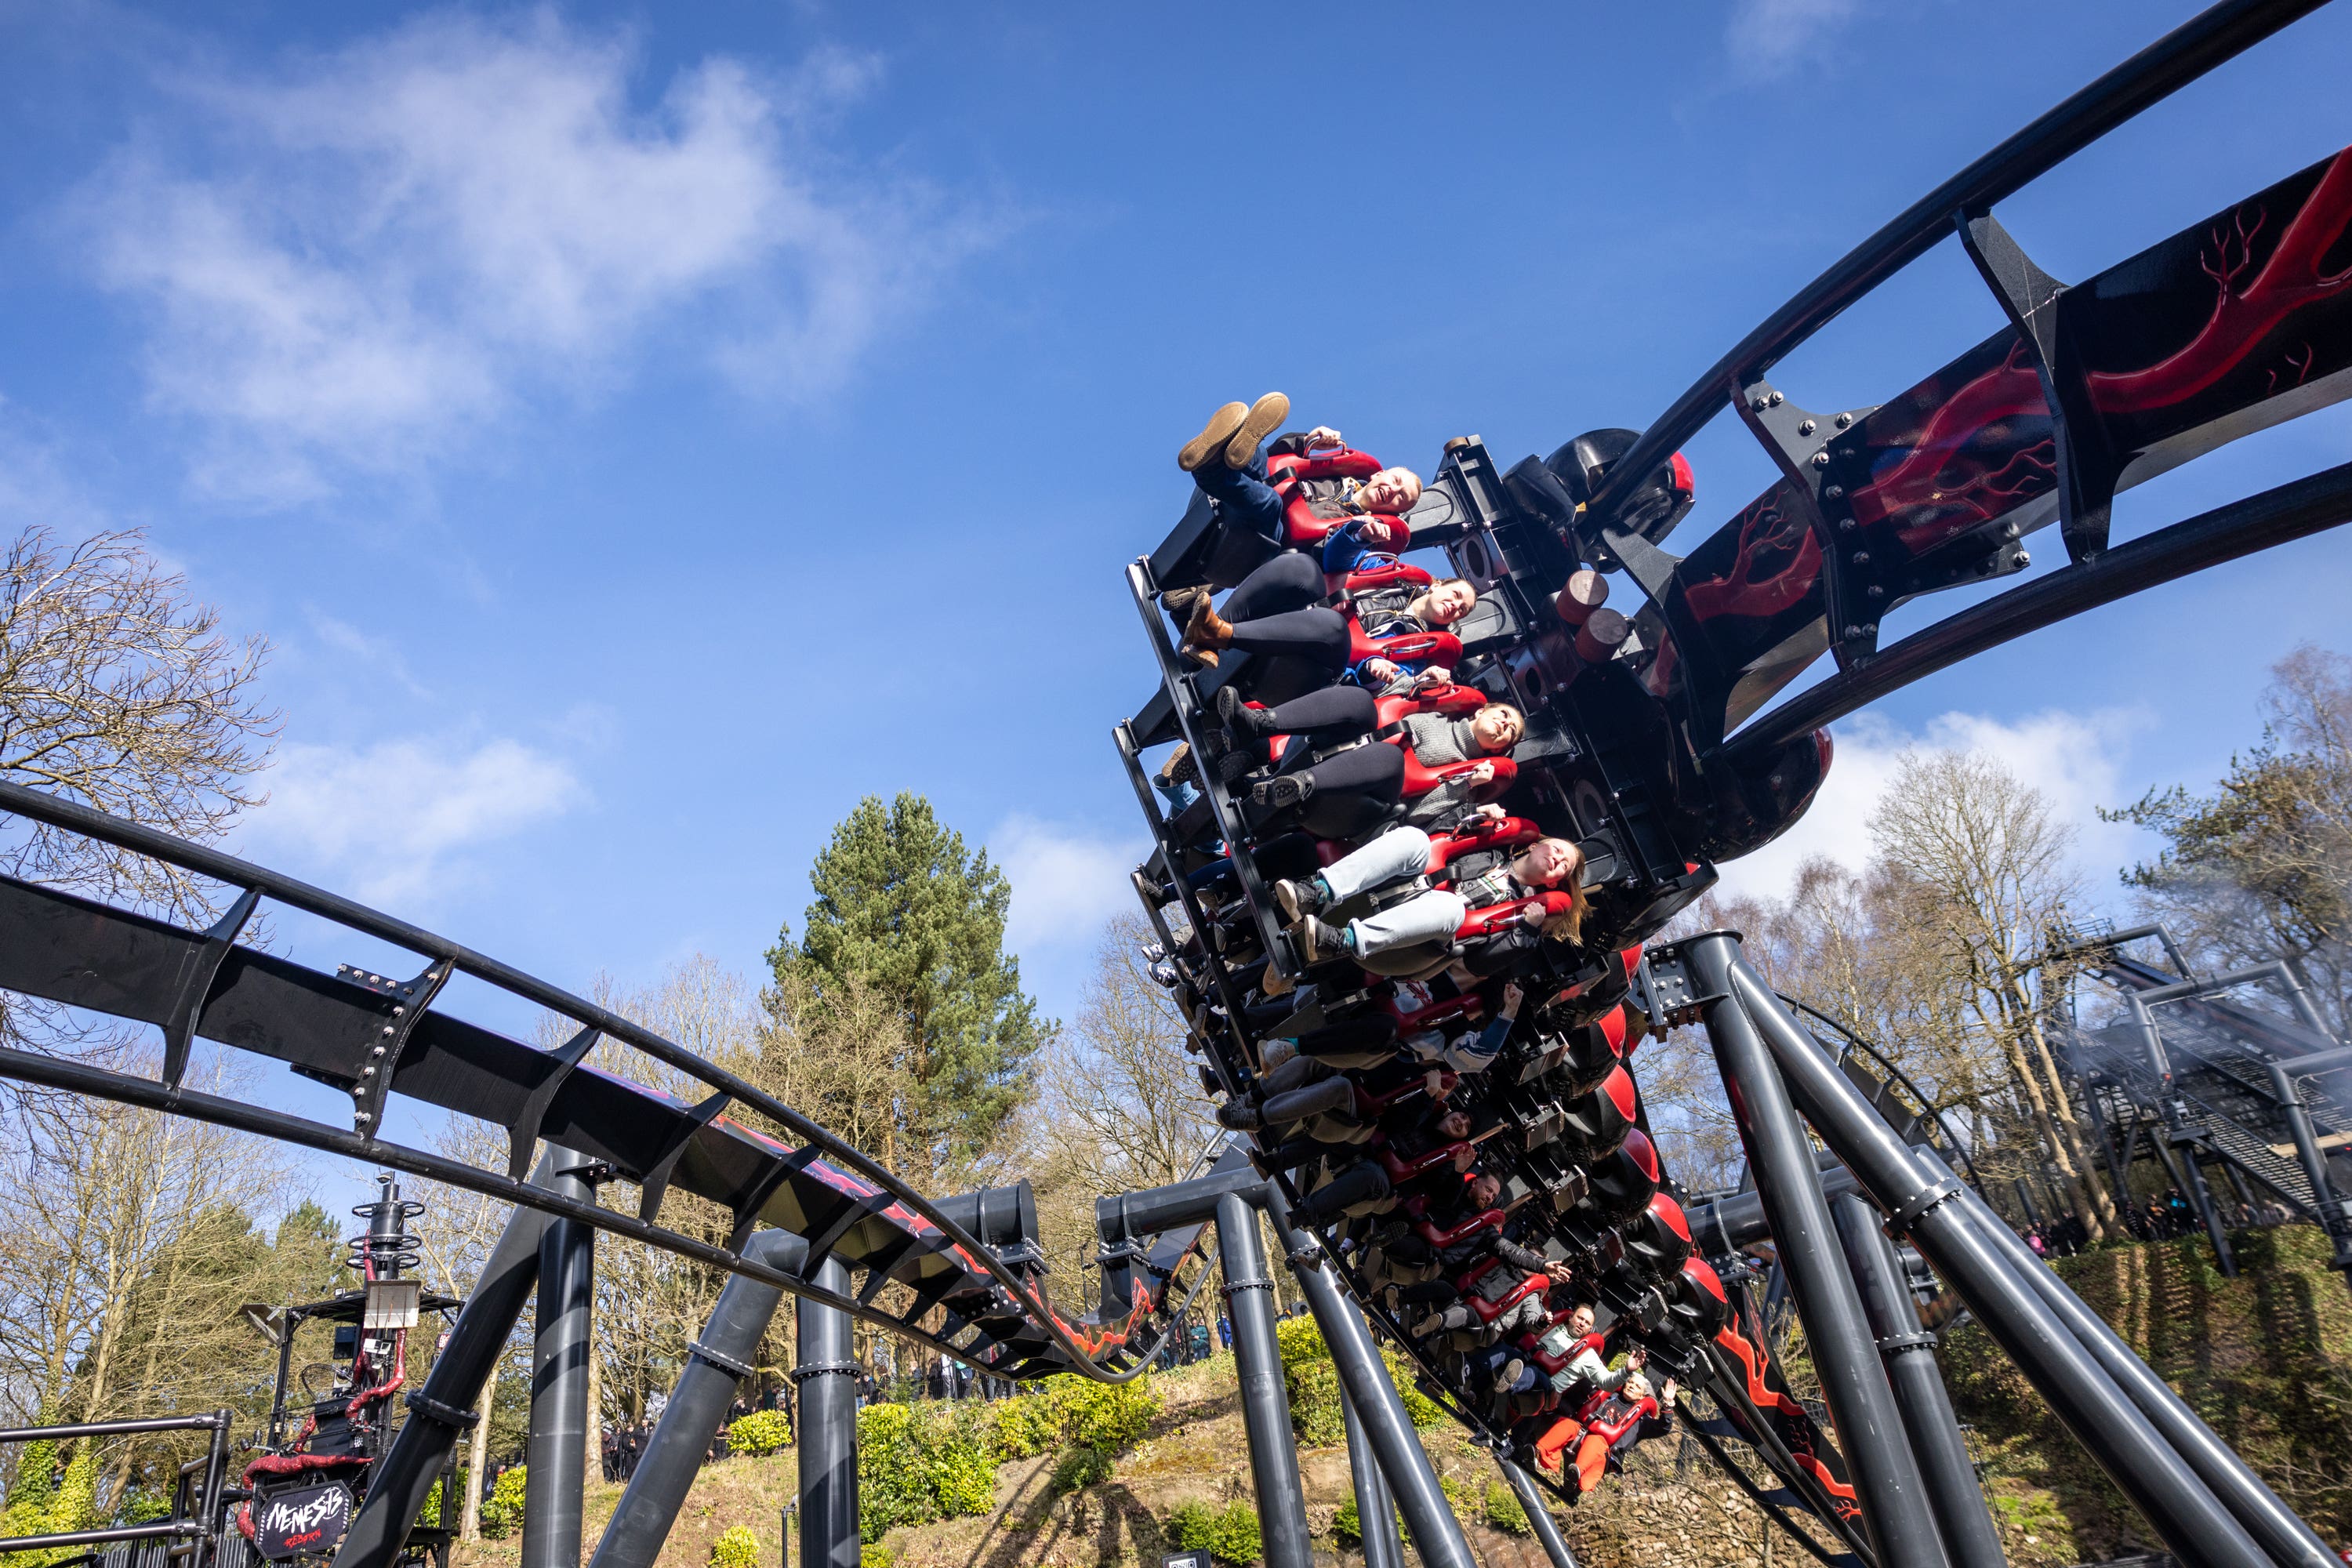 Merlin Entertainments are bringing in an airline-style surge pricing for atractions like Alton Towers and Legoland